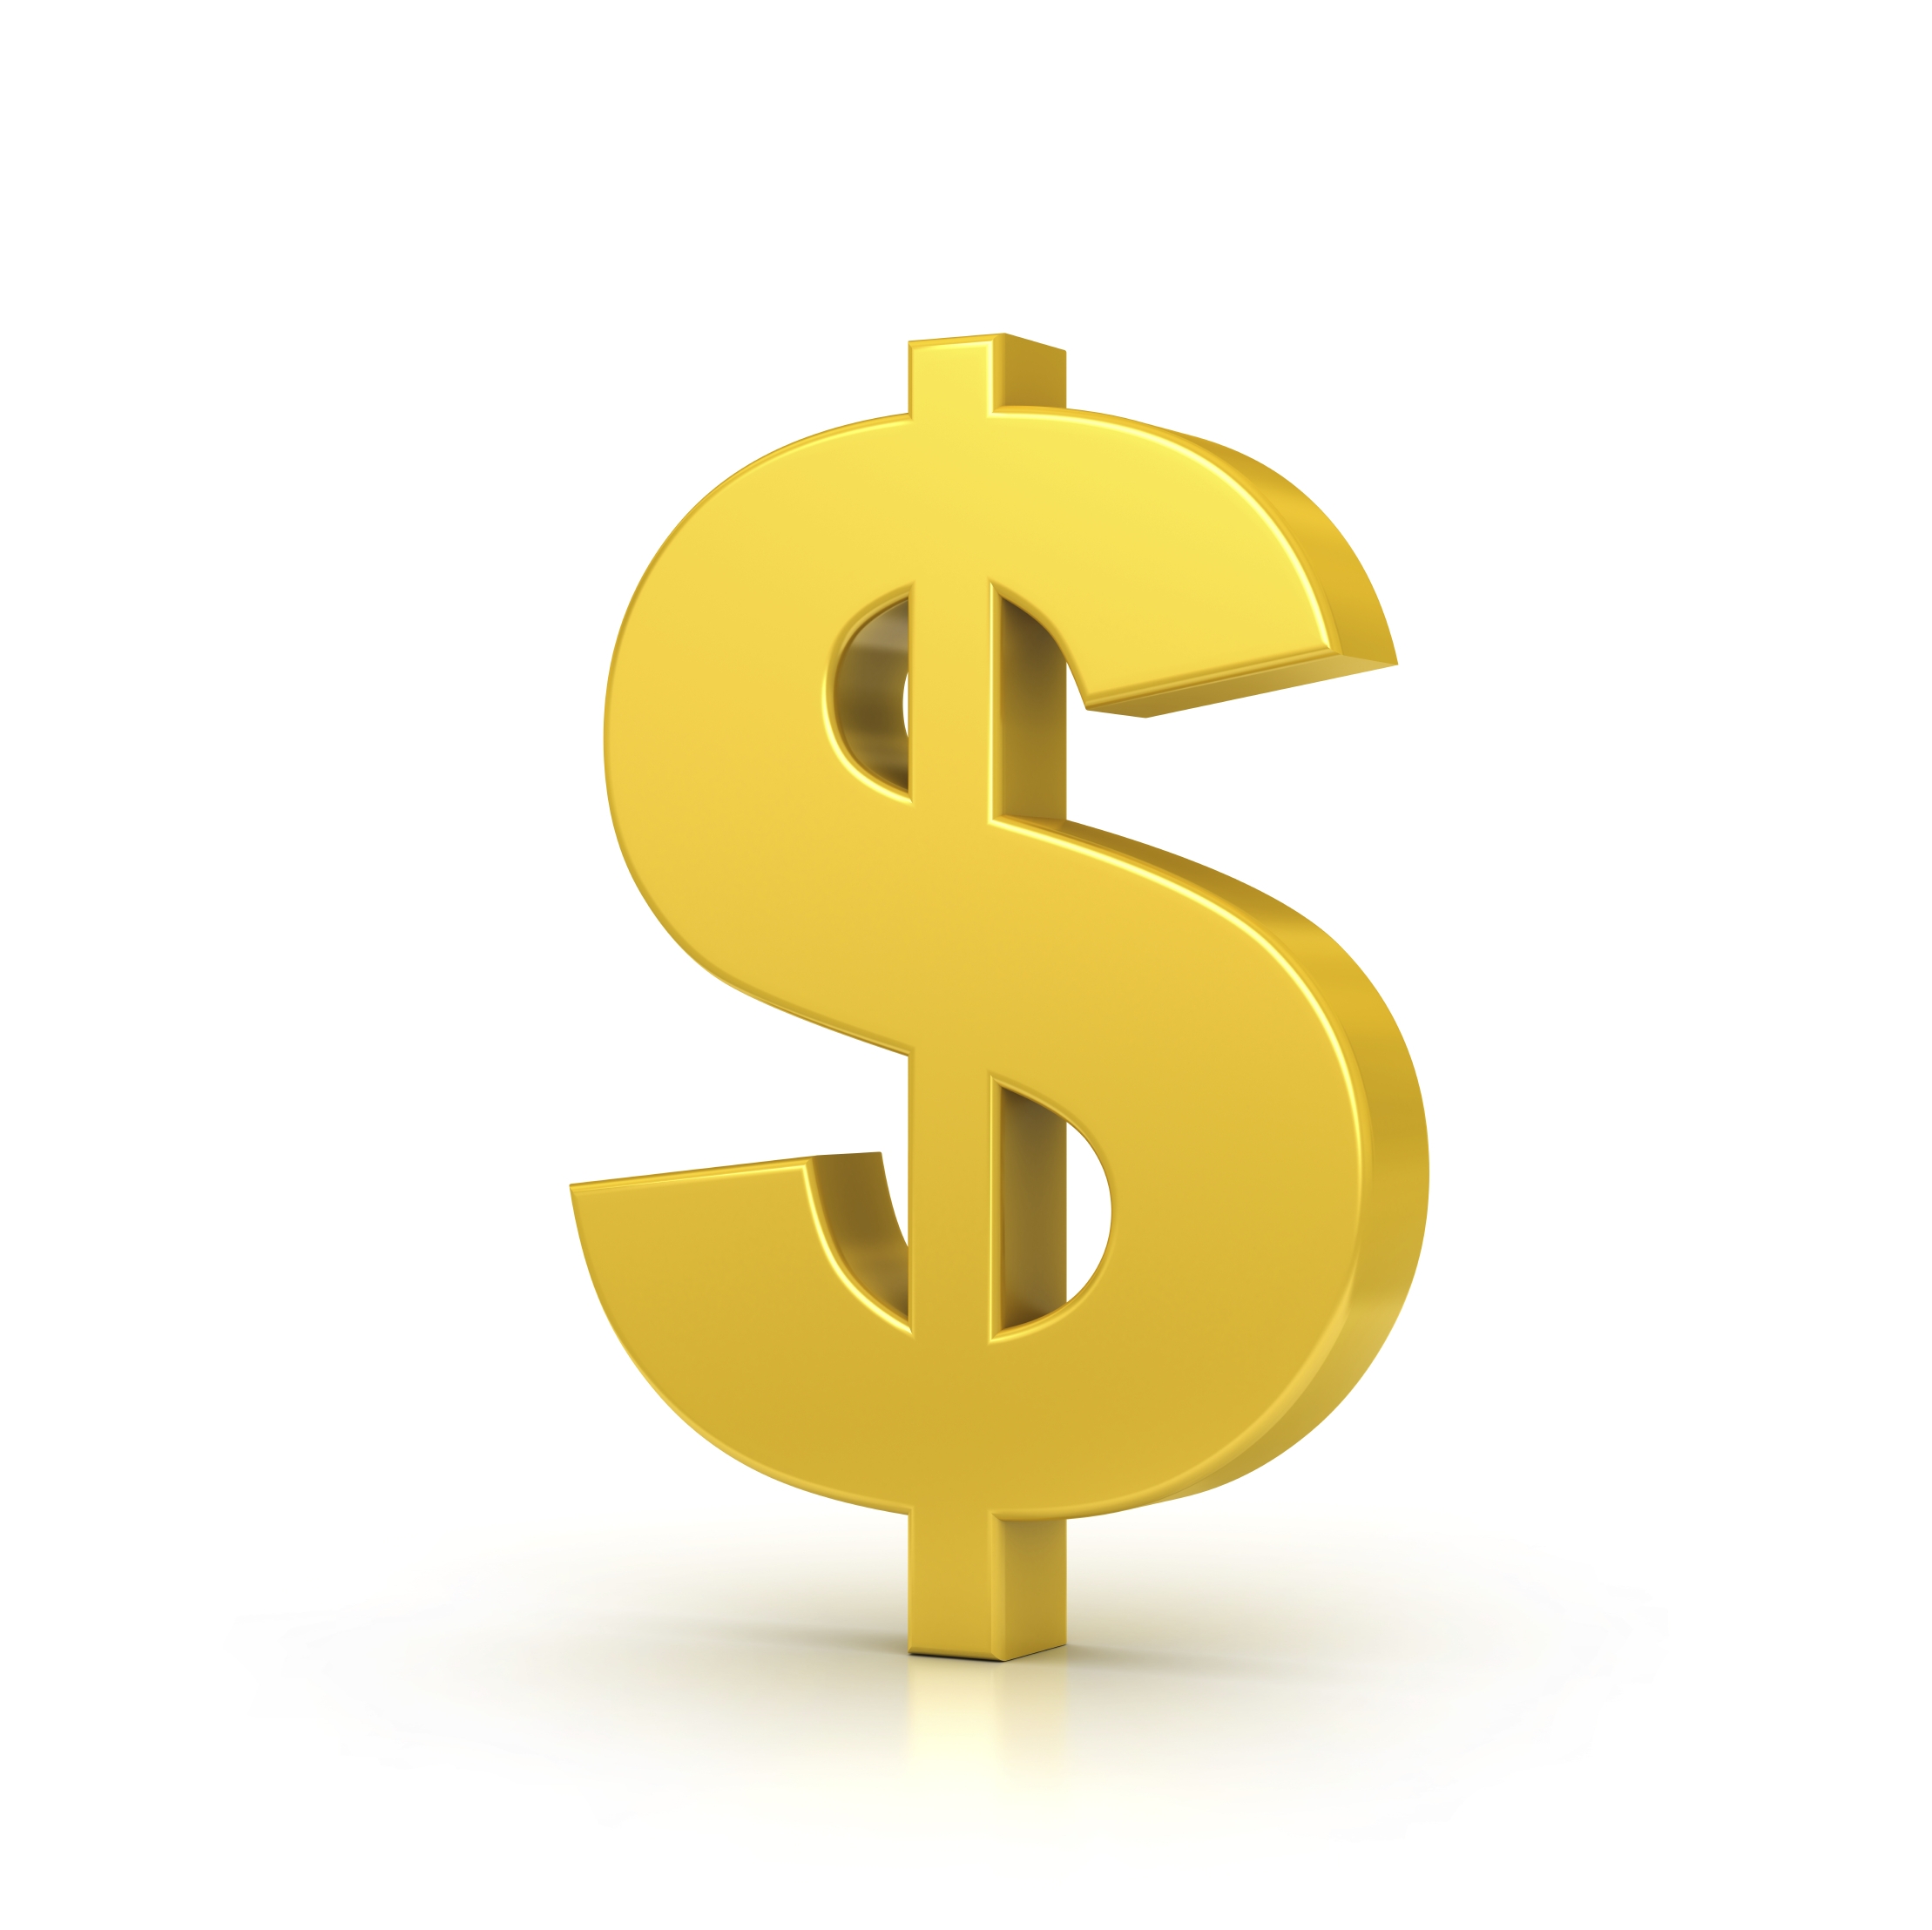 Dollar Sign Png - ClipArt Best